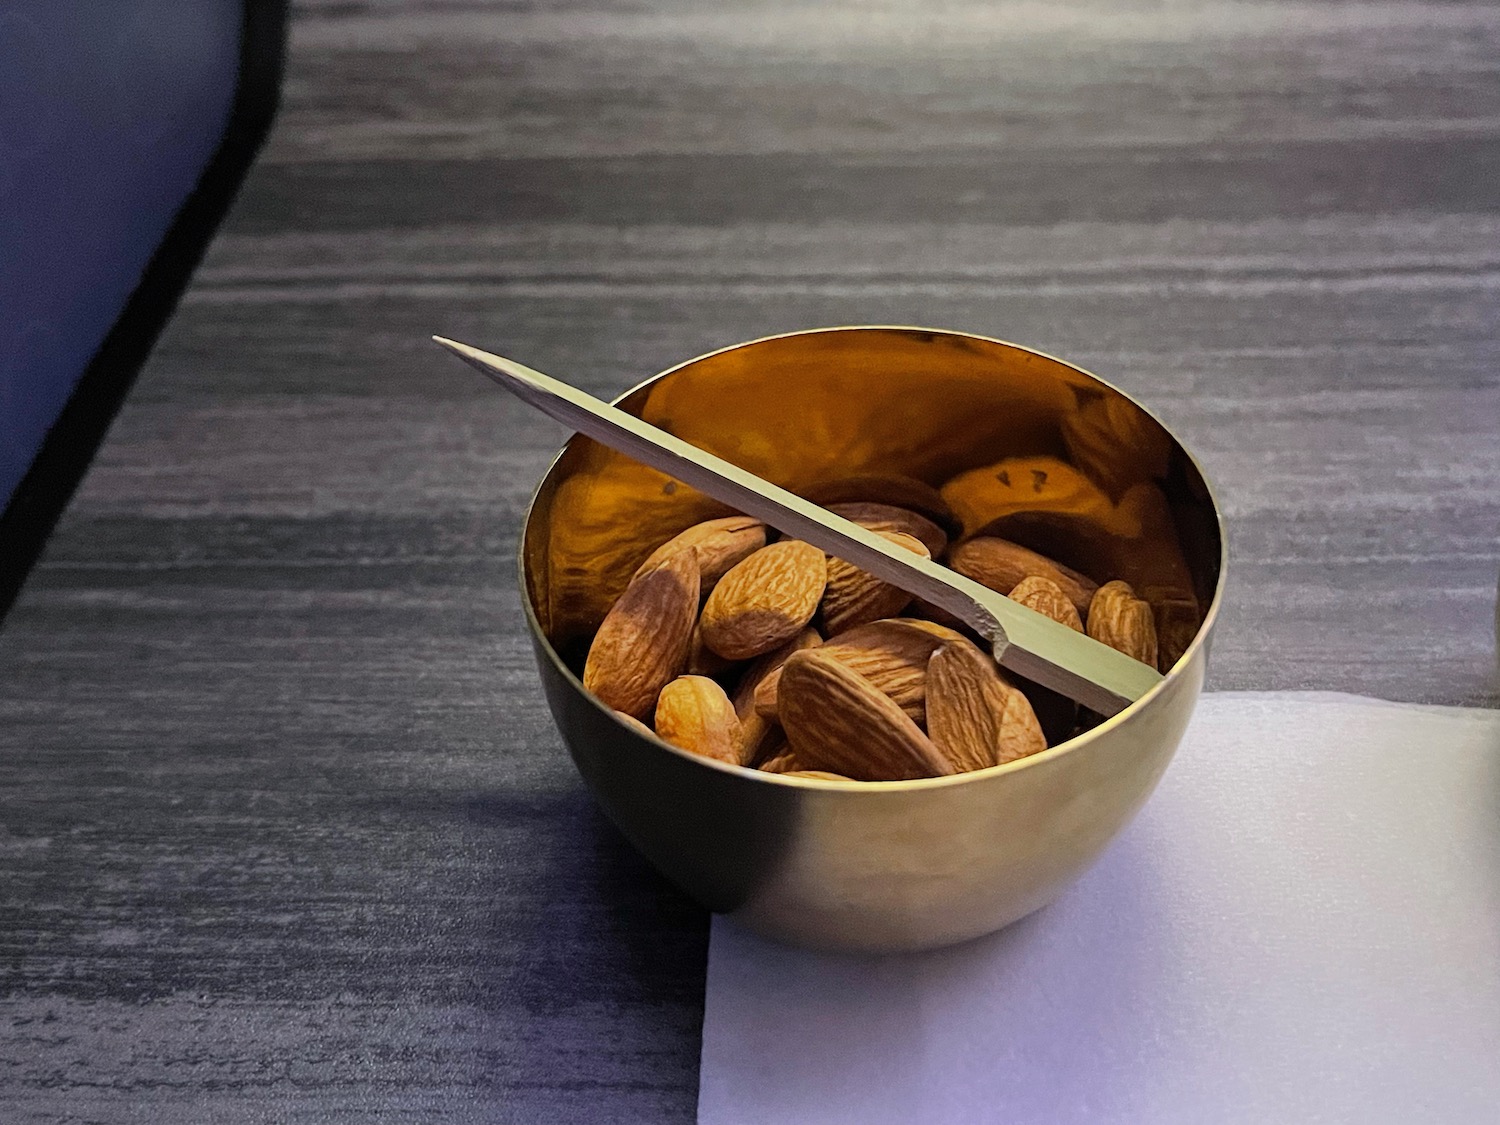 a bowl of nuts and a knife